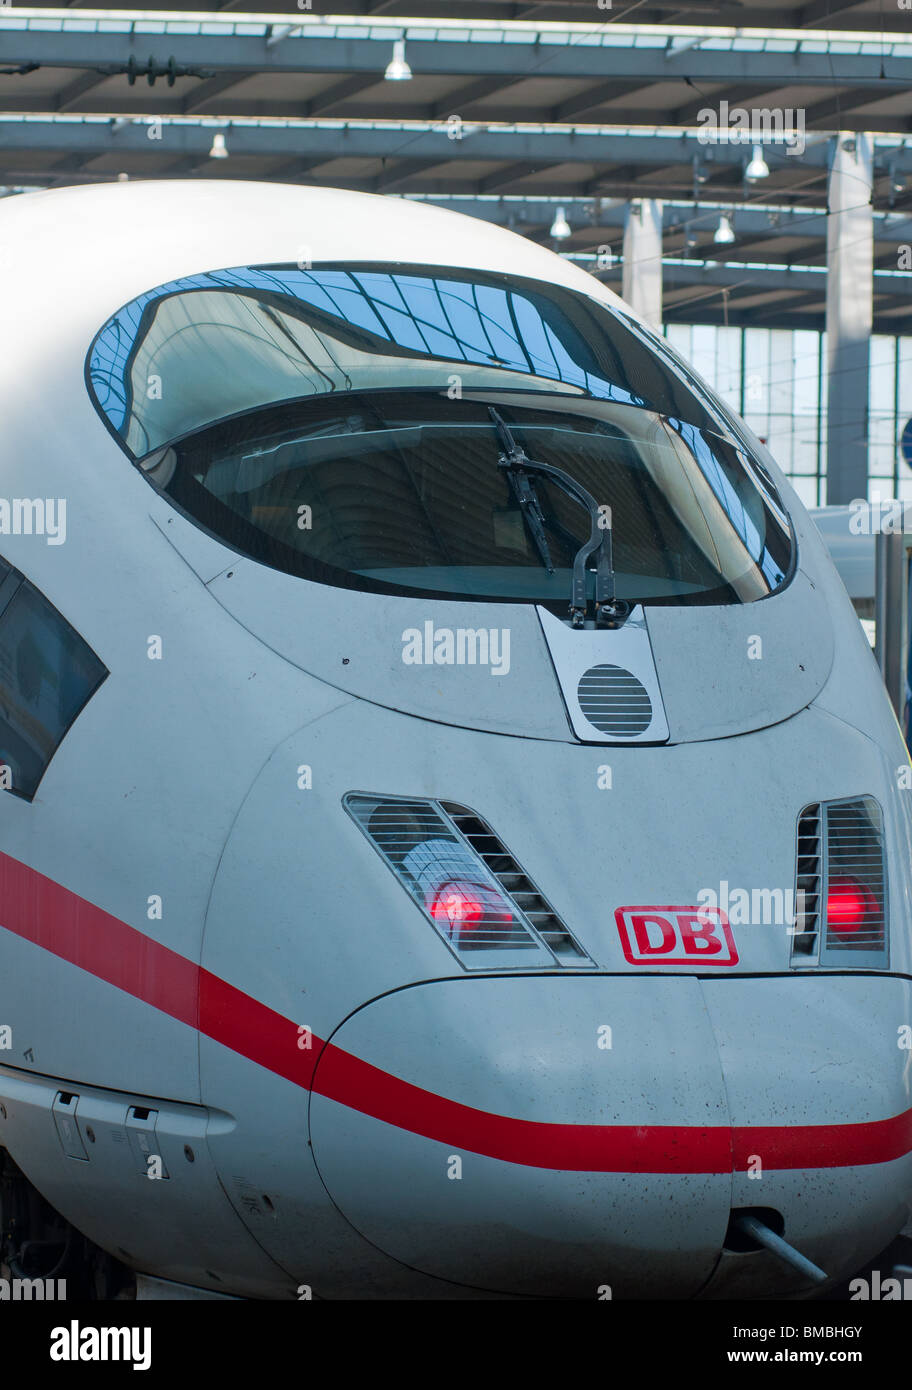 Germany's Intercity express or ICE at Munich station. Stock Photo